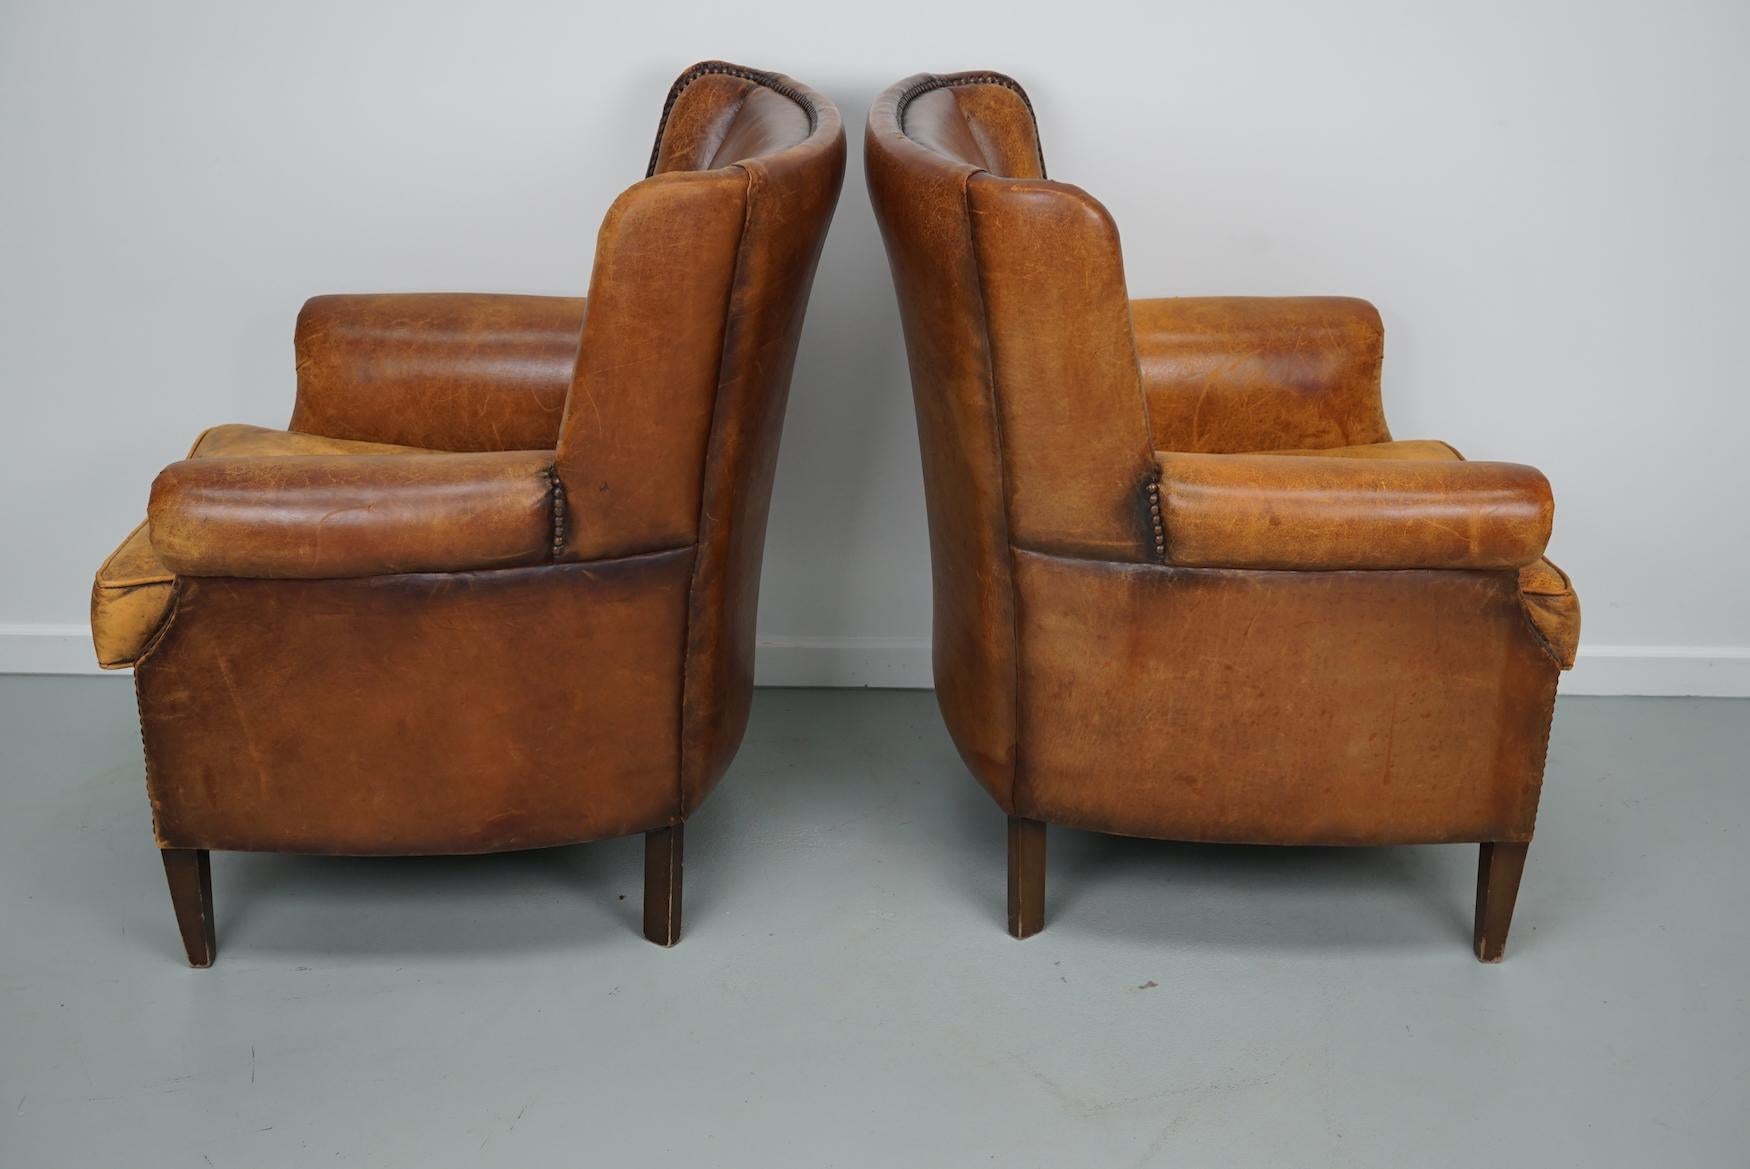 Vintage Dutch Cognac Colored Leather Club Chair, Set of 2 with Footstool 1